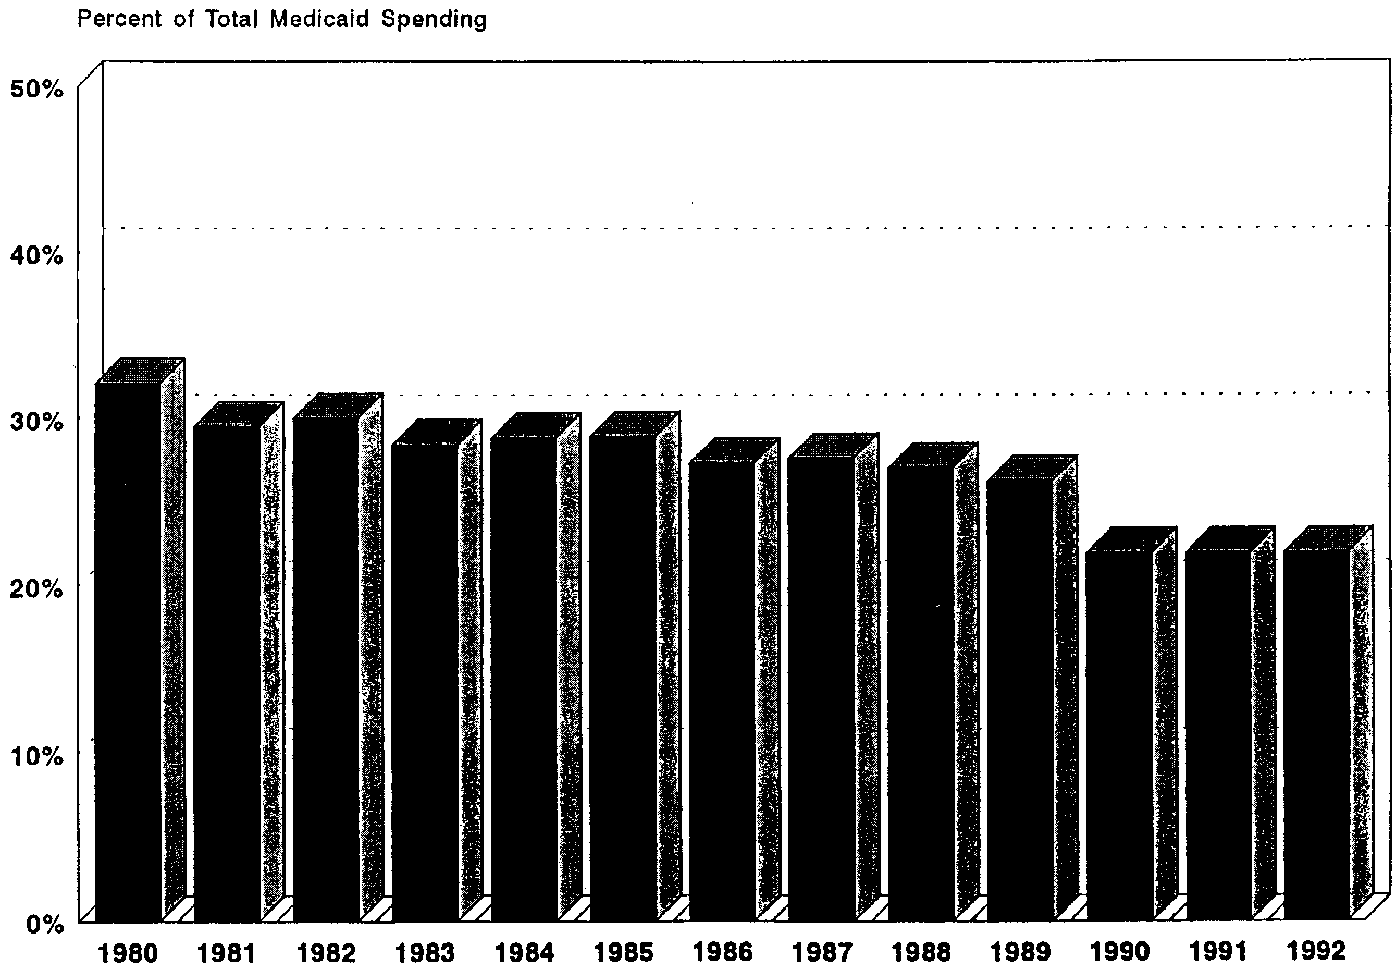 Bar Chart: Medicaid Nursing Home Spending for the Elderly as a Proportion of Total Medicaid Spending: 1980-1992